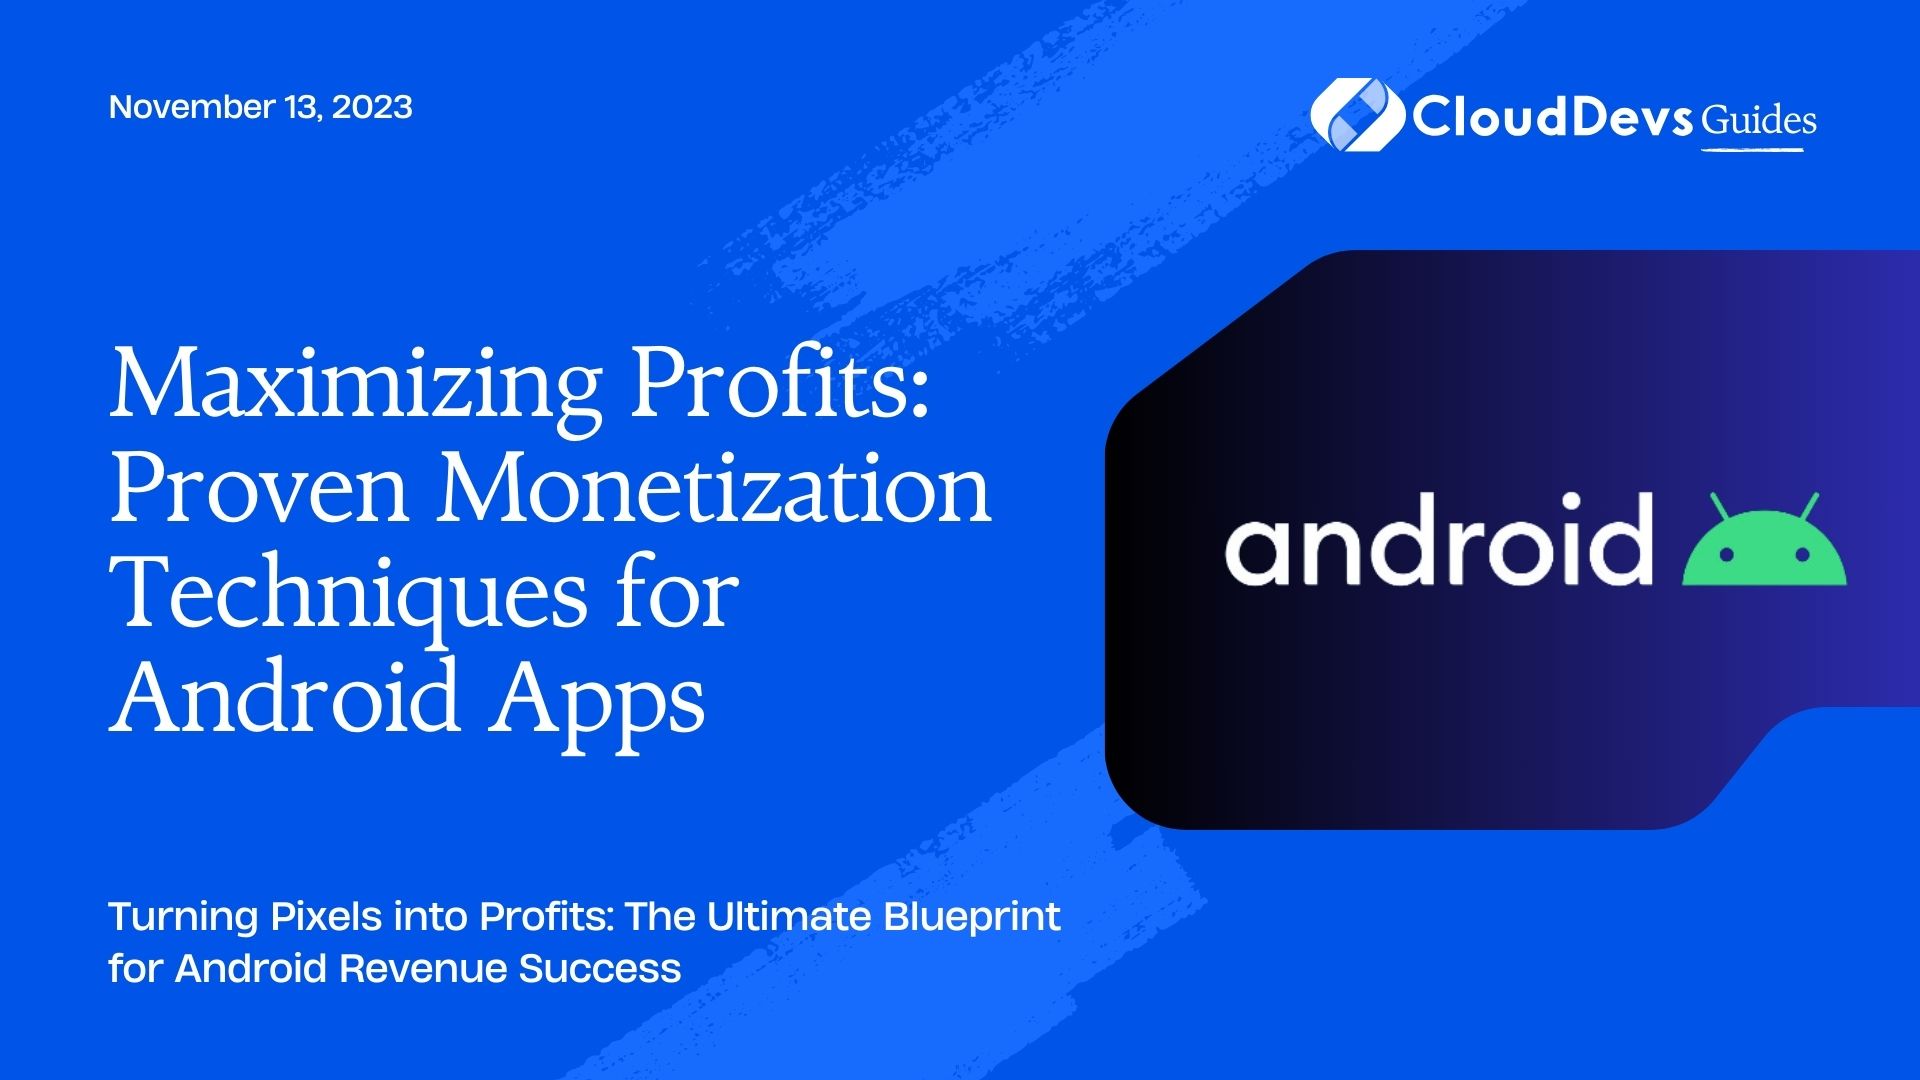 Maximizing Profits: Proven Monetization Techniques for Android Apps